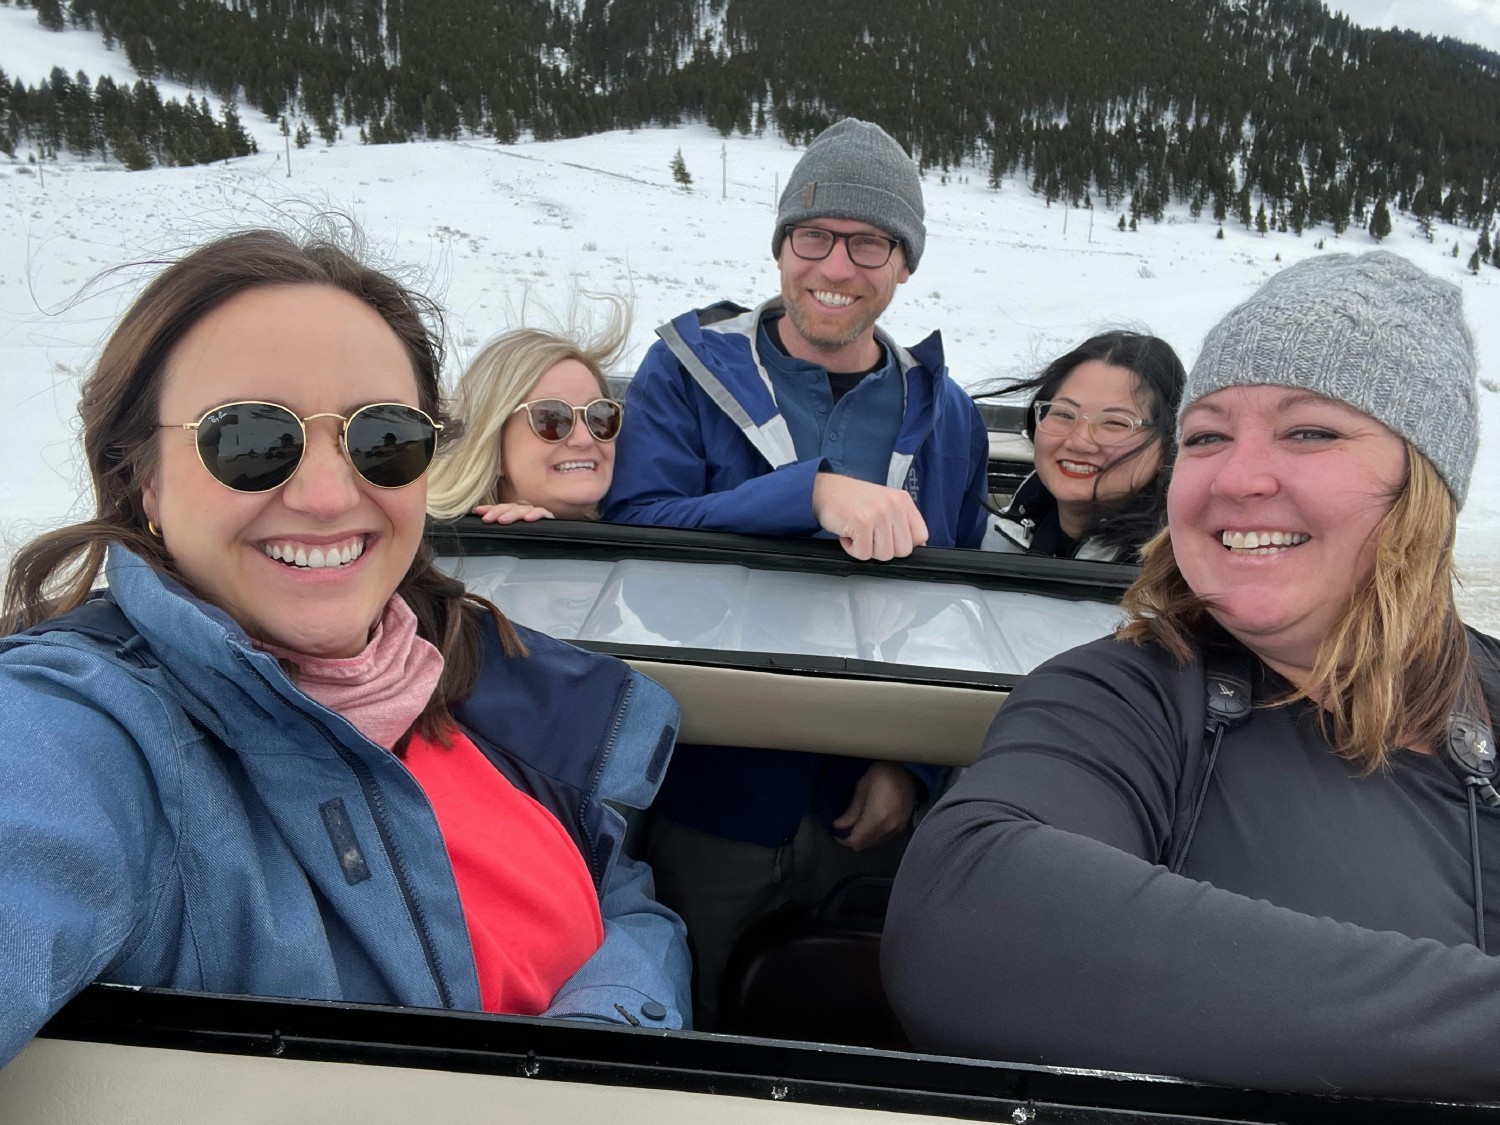 Our work takes on adventures, including participating in all the winter fun that client Jackson Hole has to offer.